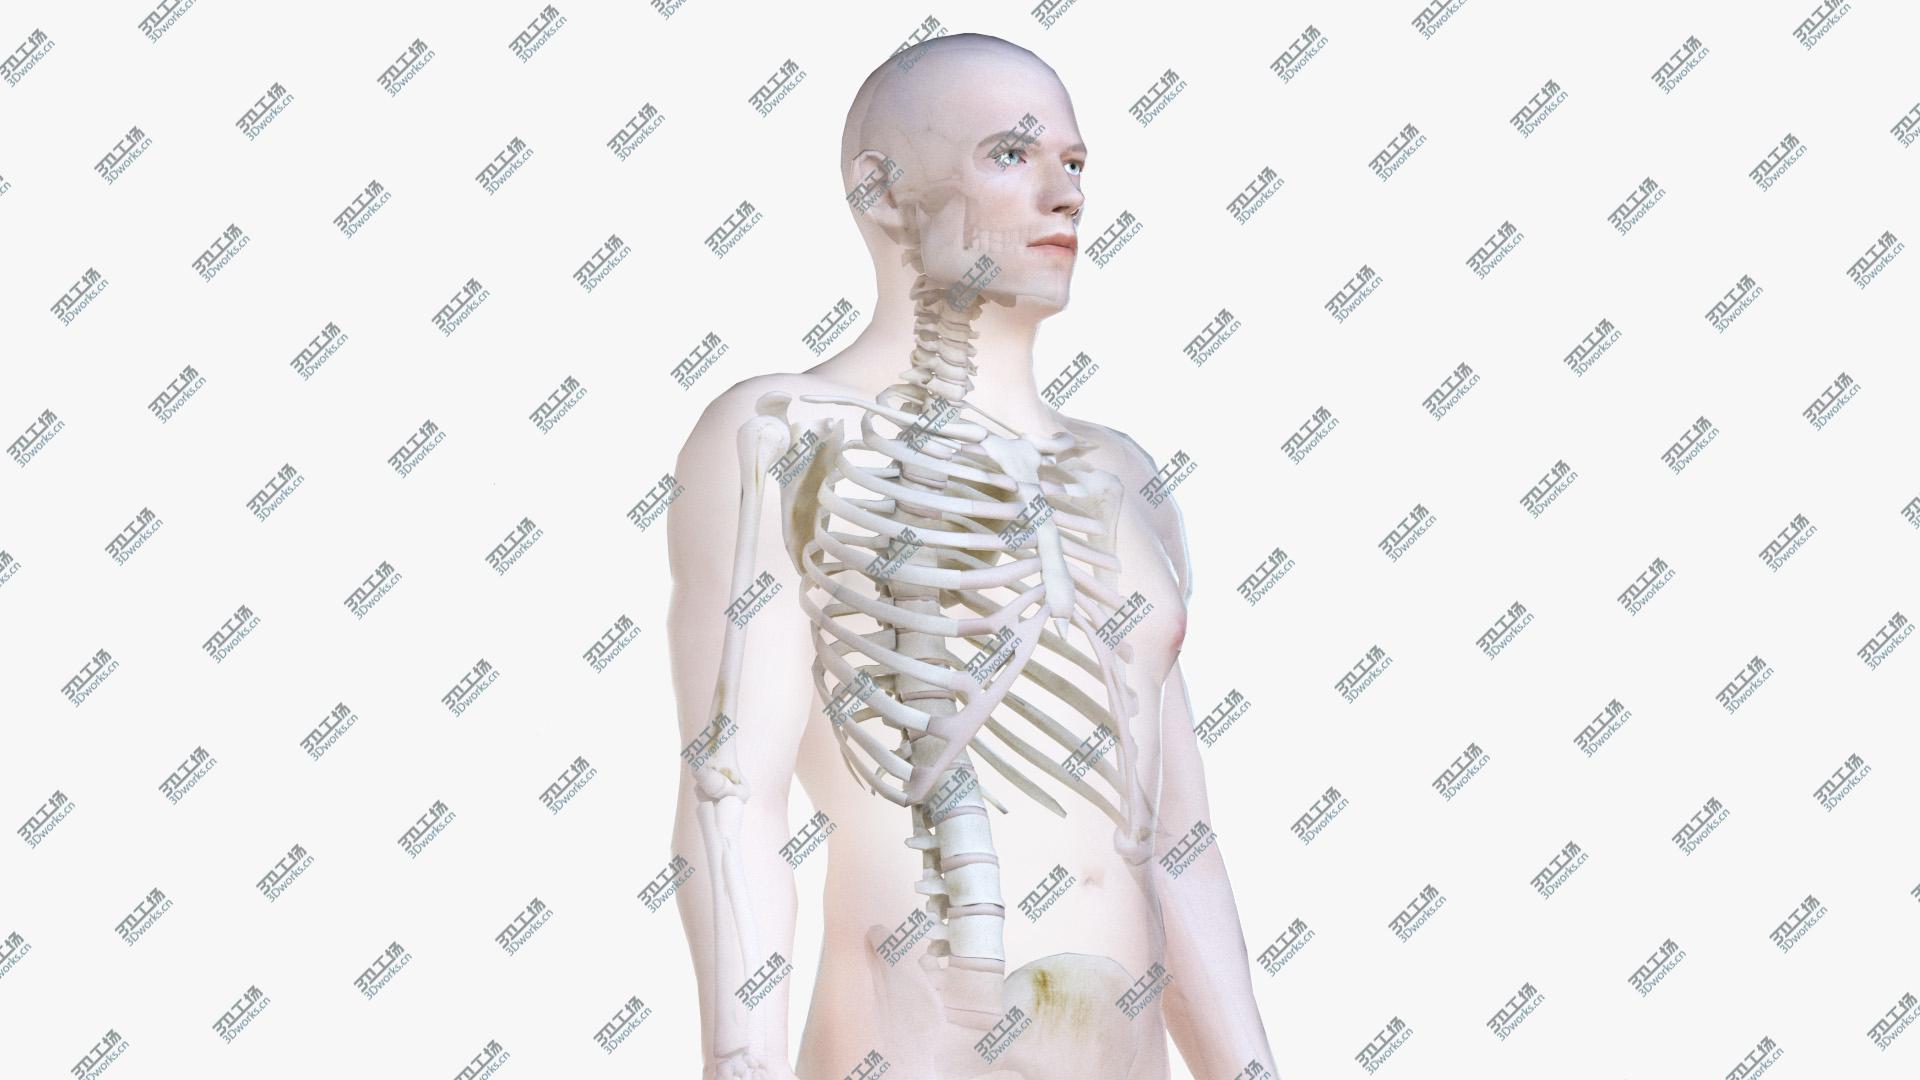 images/goods_img/202104093/3D Male Body and Skeleton (Low Poly) model/1.jpg